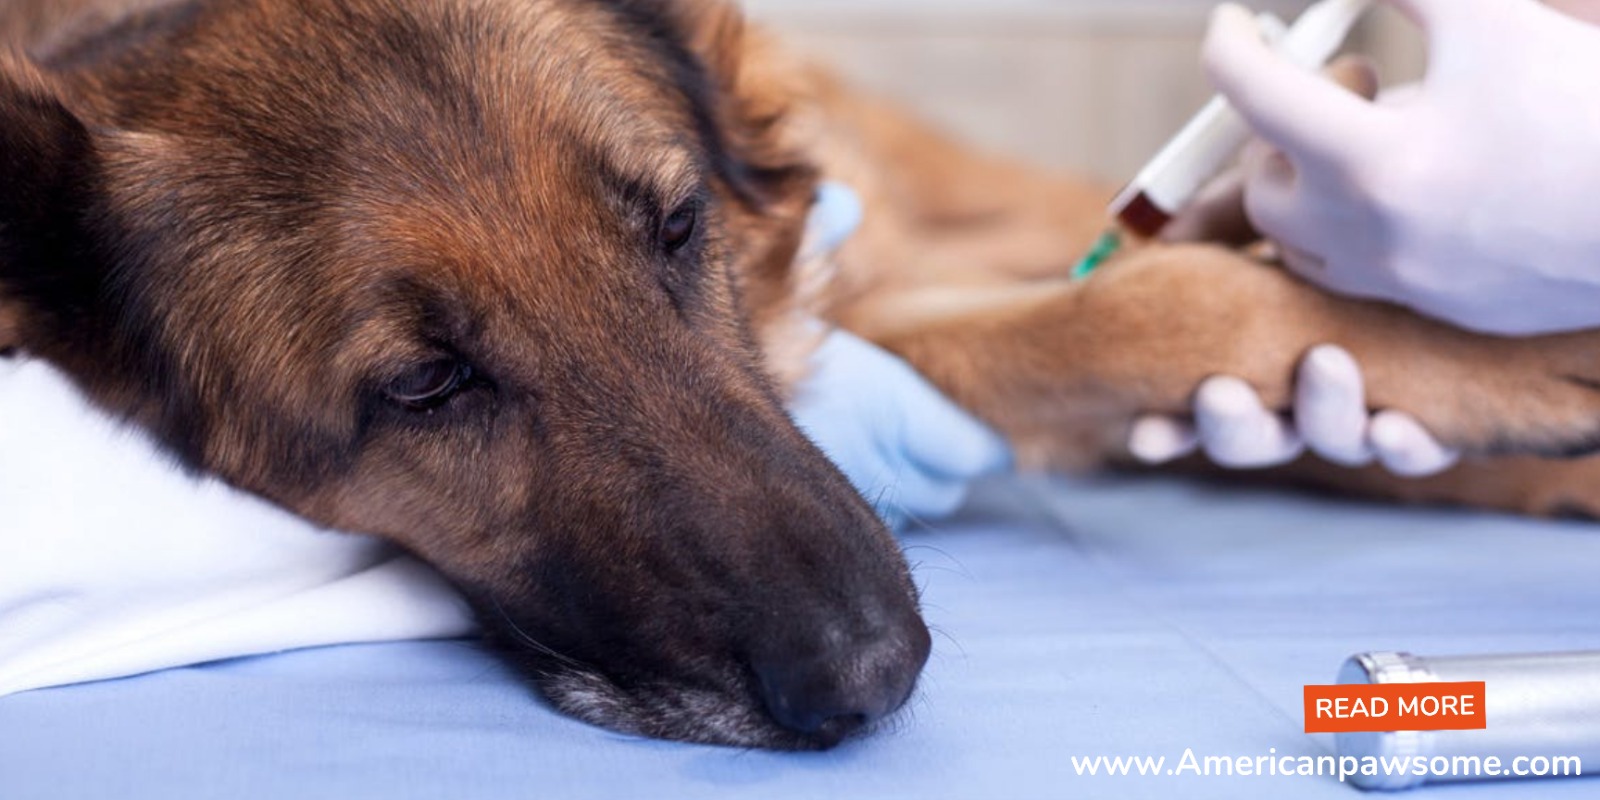 Can a vaccinated dog get kennel cough?